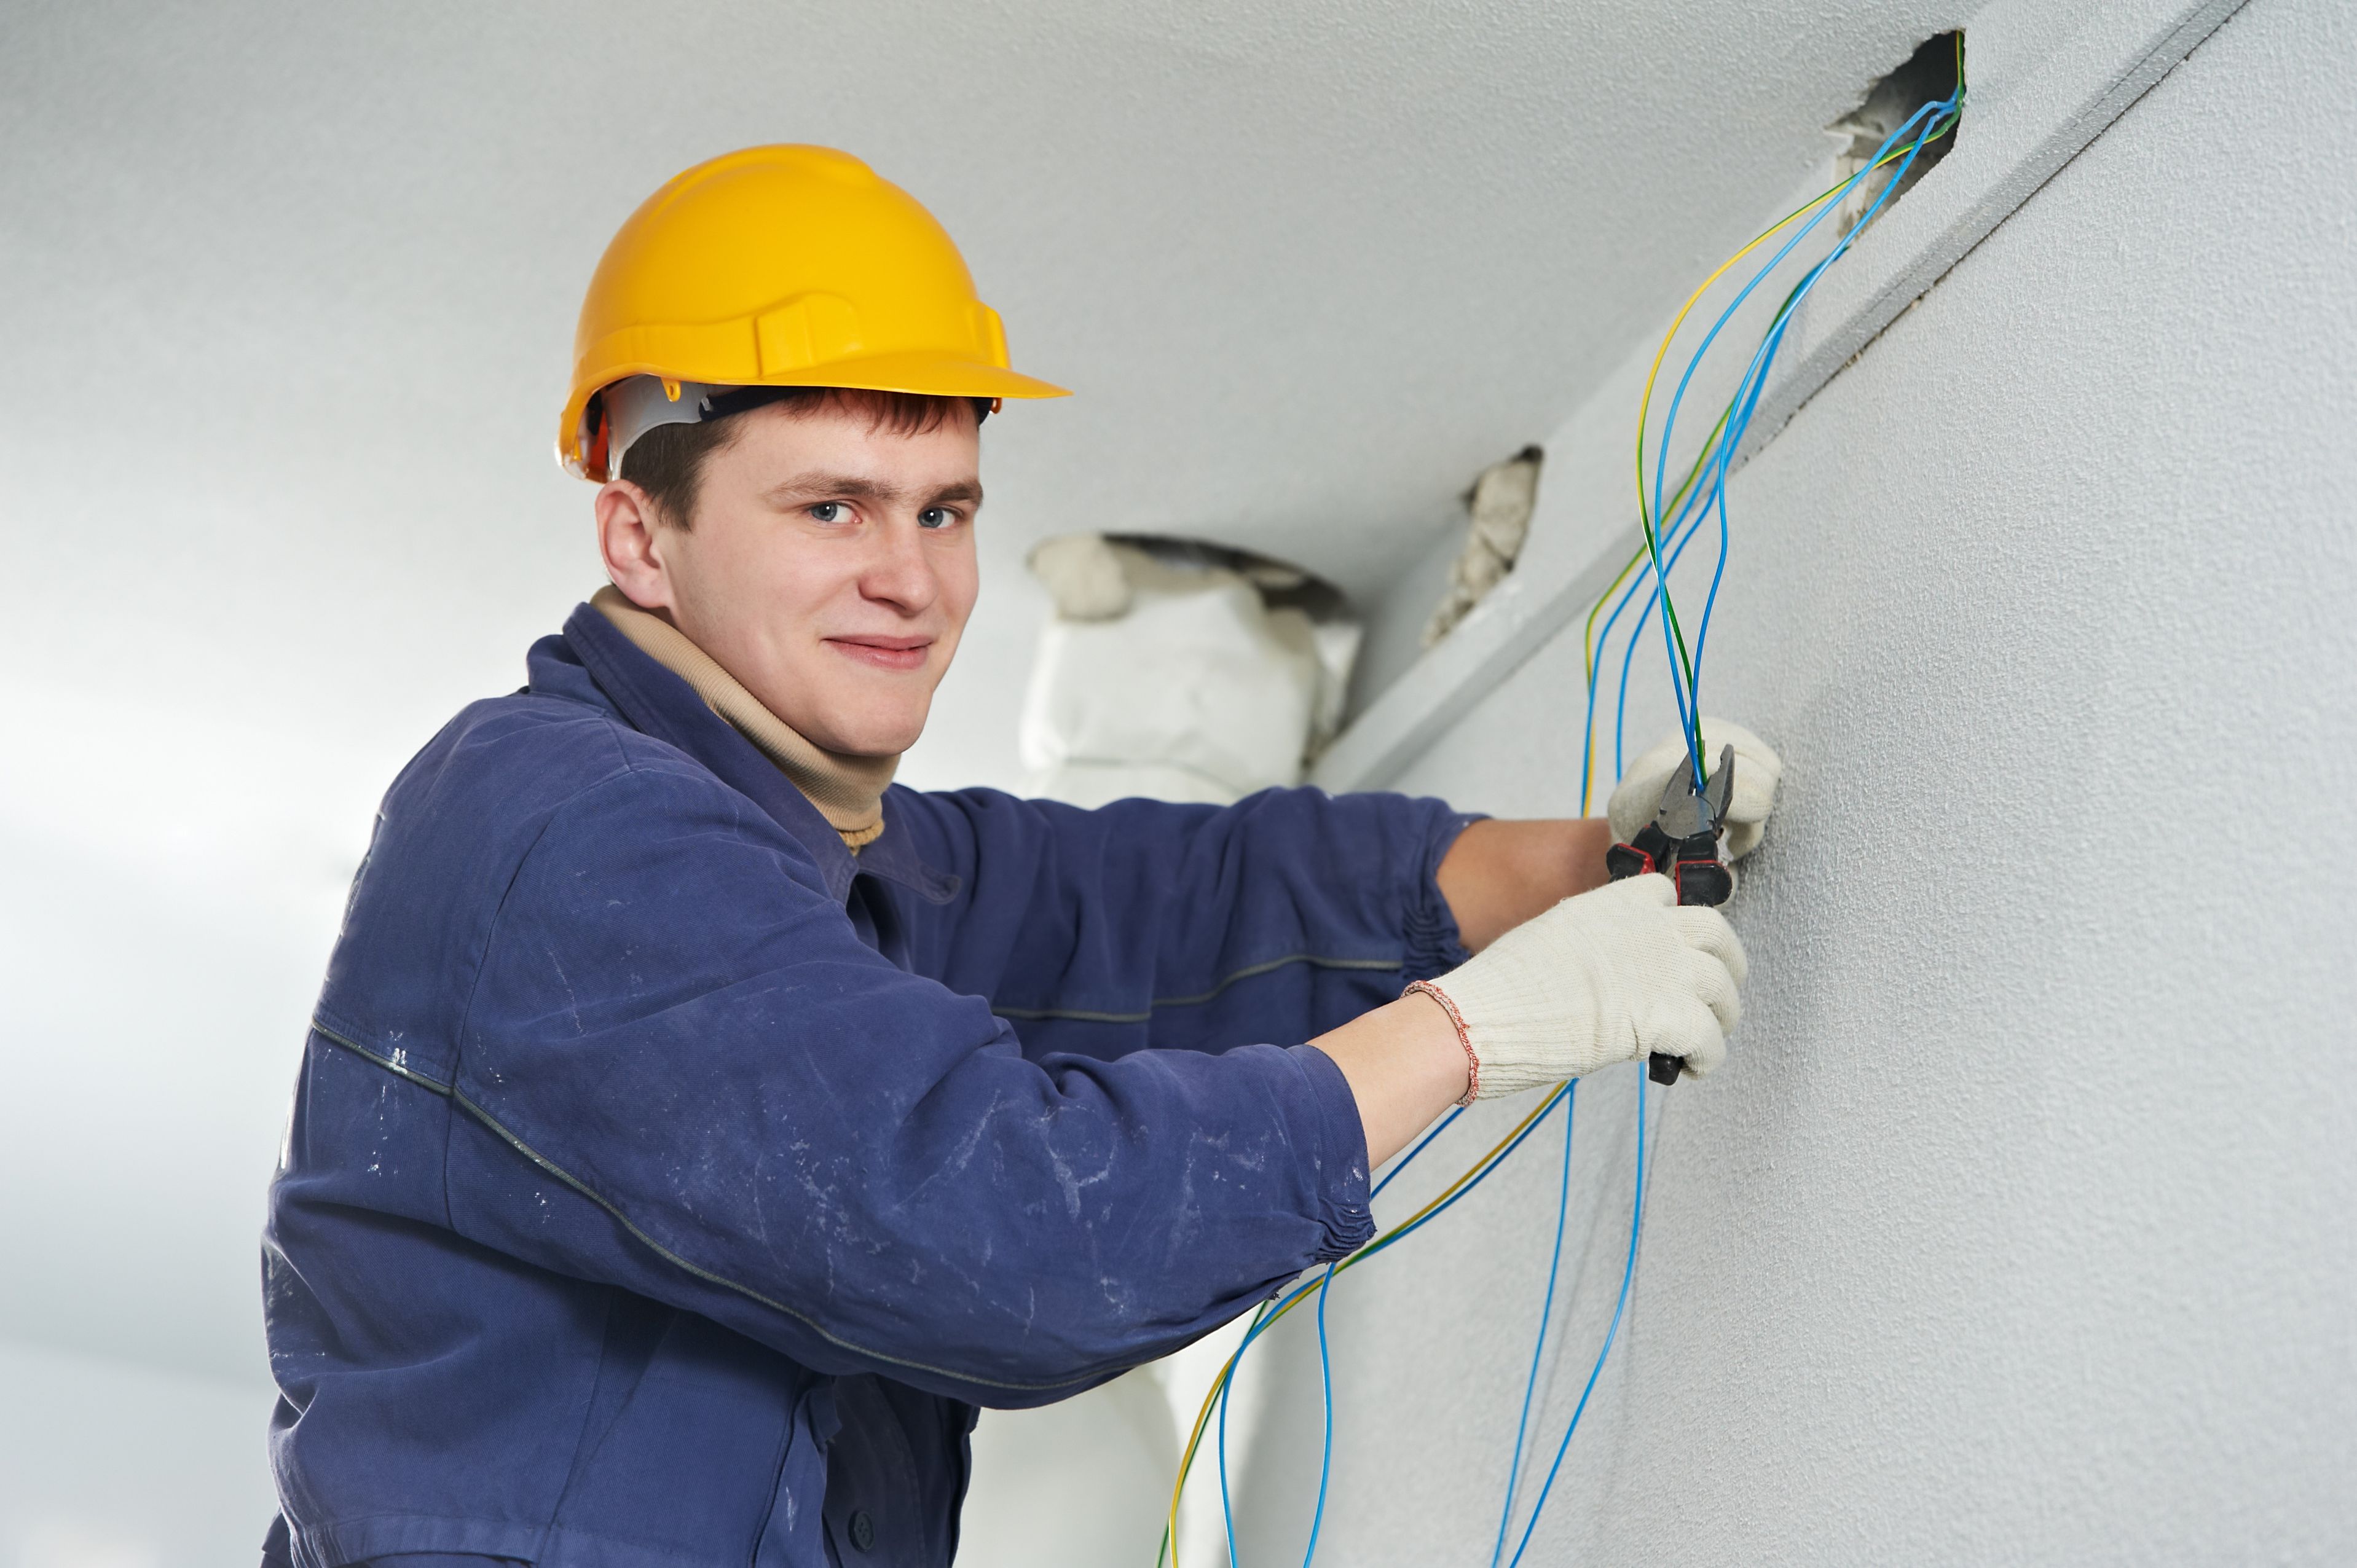 Take Care Of Repairs With a Licensed Electrician In Fishers